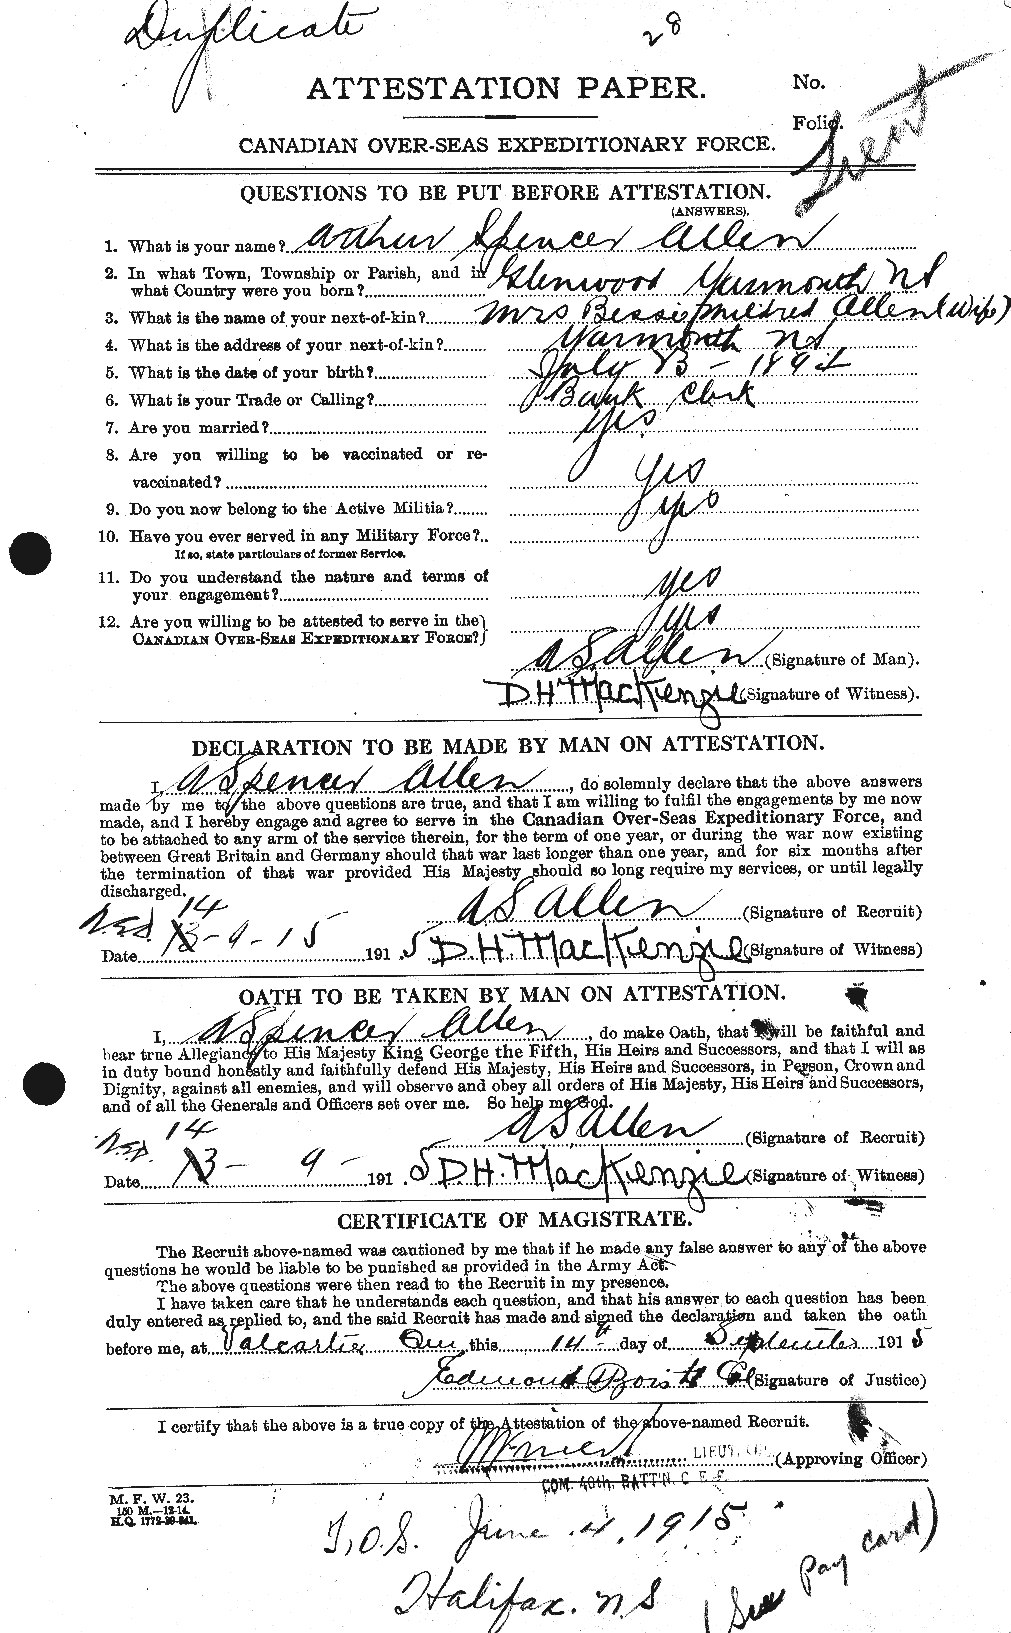 Personnel Records of the First World War - CEF 205955a